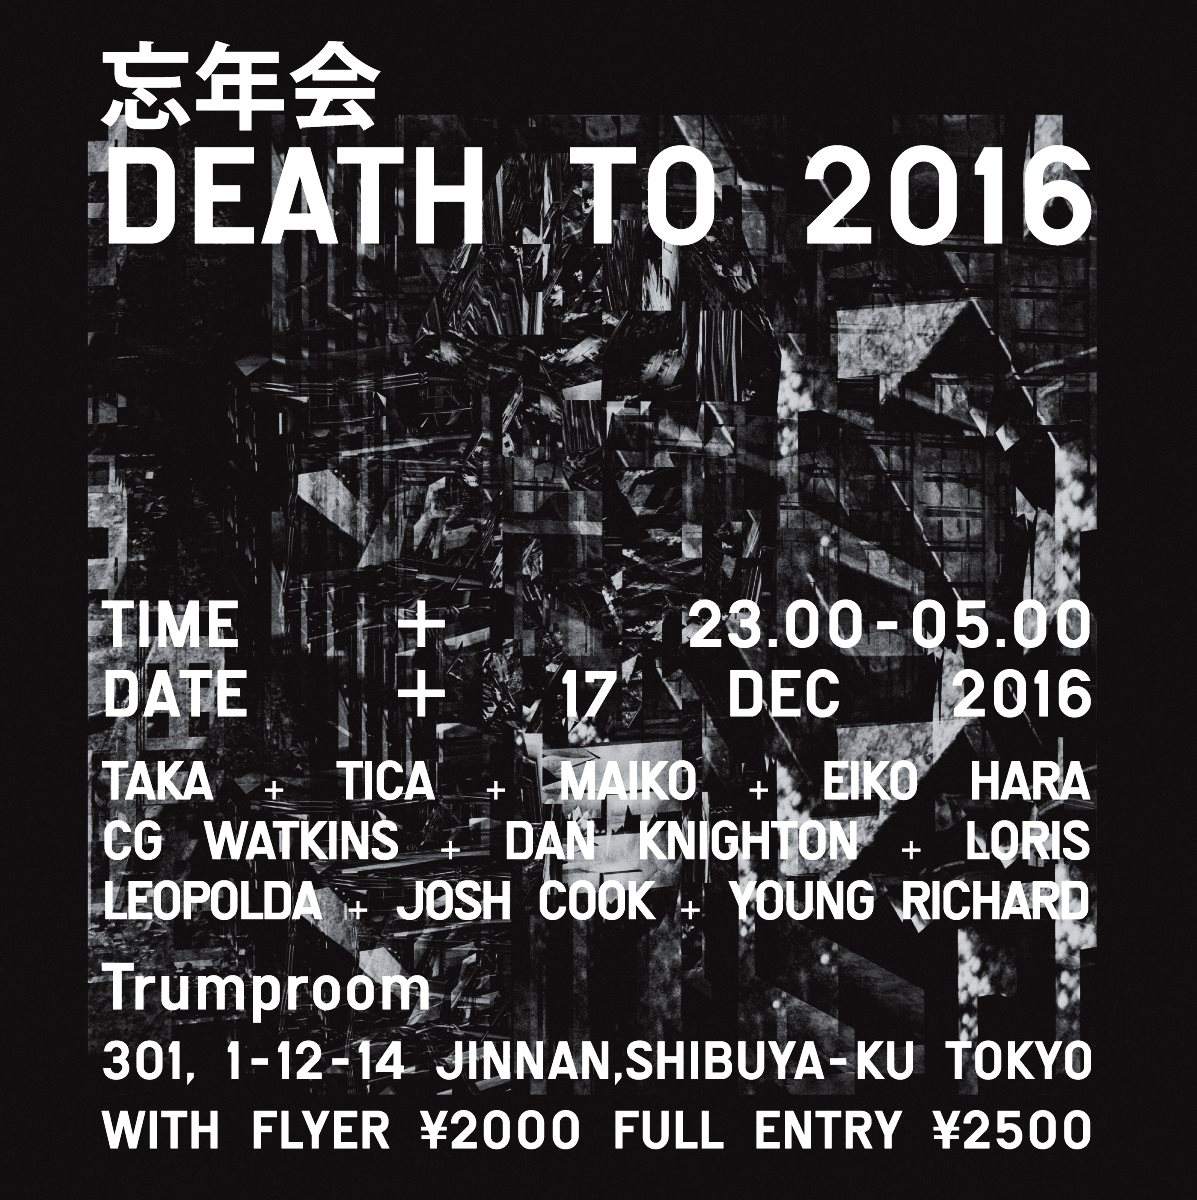 Death to 2016 忘年会 End of Year Party - フライヤー表